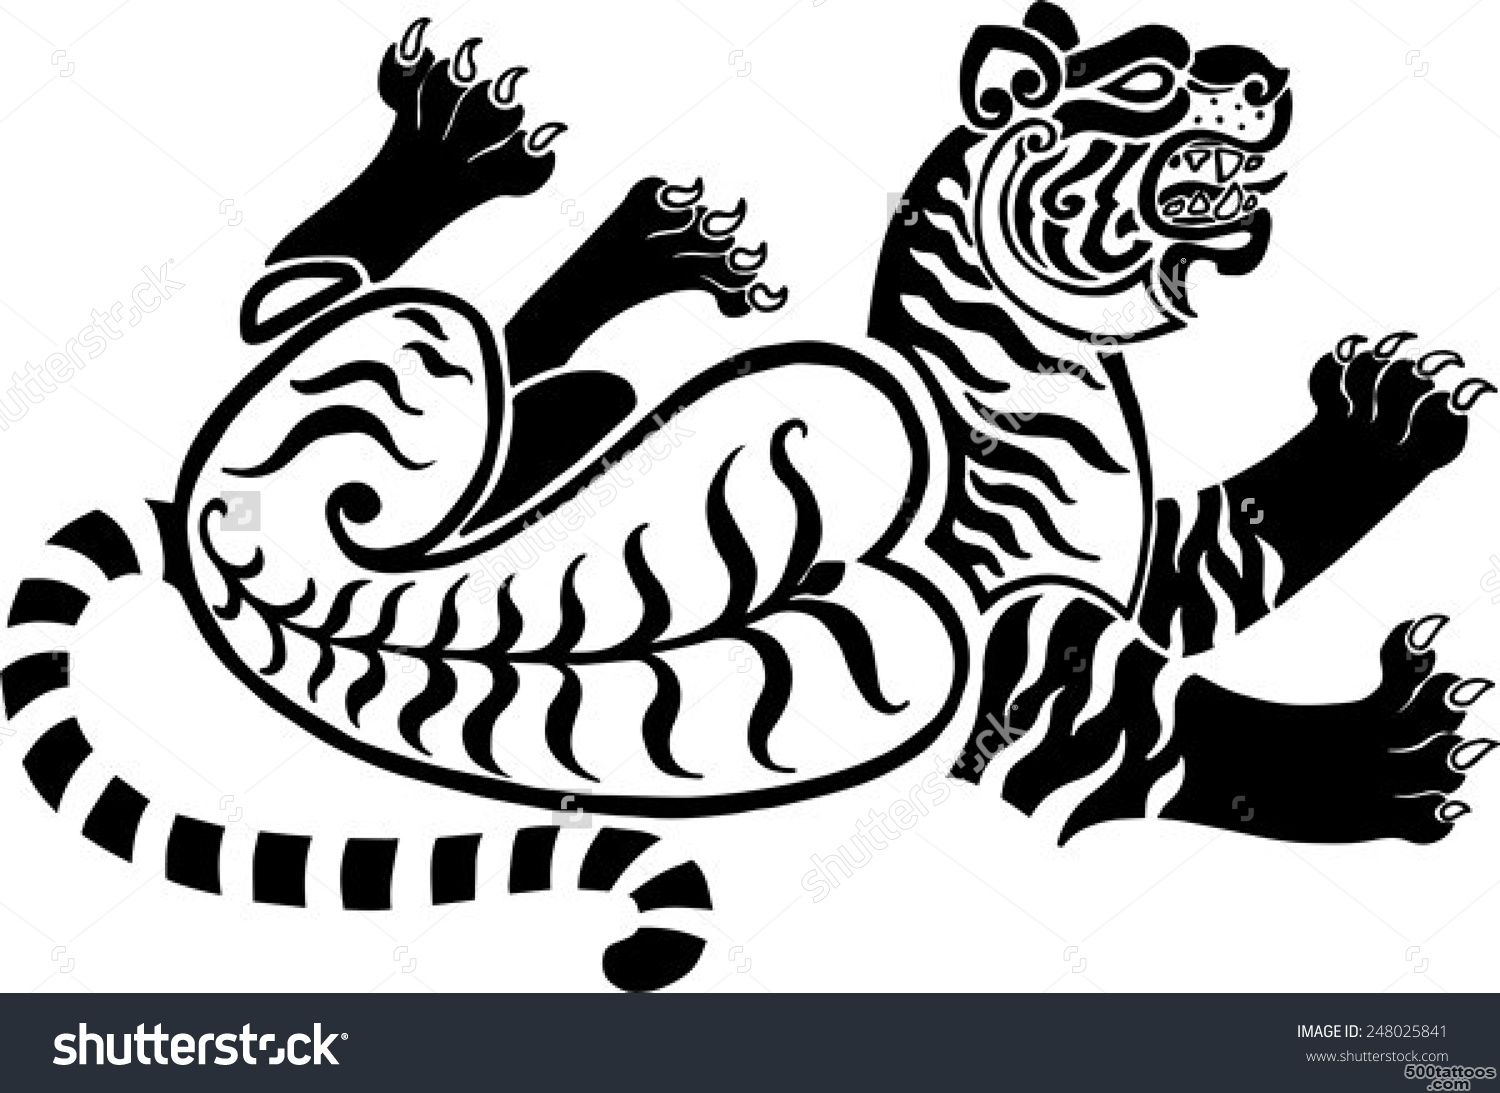 Running Twisted A Tiger In Scythian Tattoo#39S Style Stock Vector ..._28